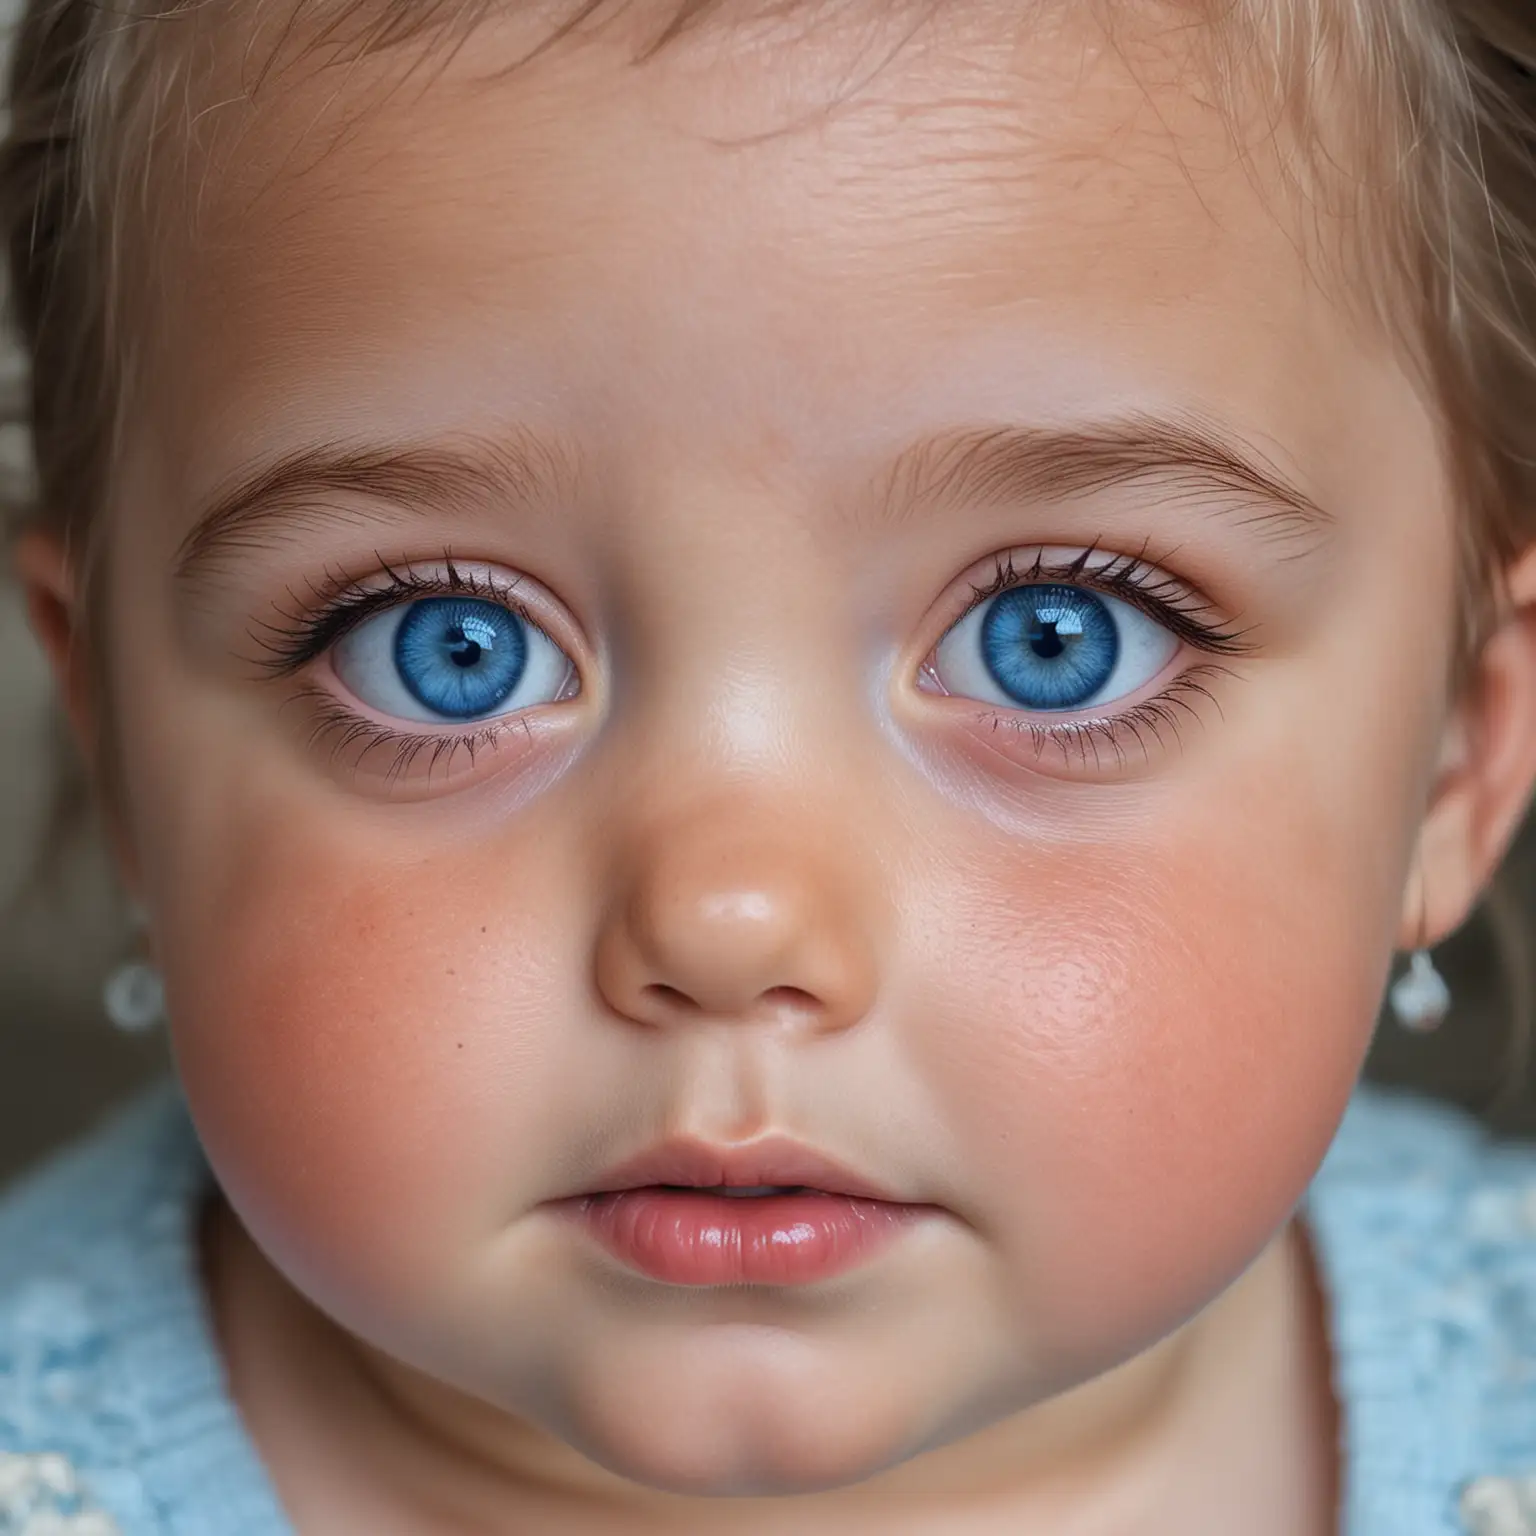 Girl-with-Rosy-Cheeks-and-Blue-Eyes-Beautiful-Portrait